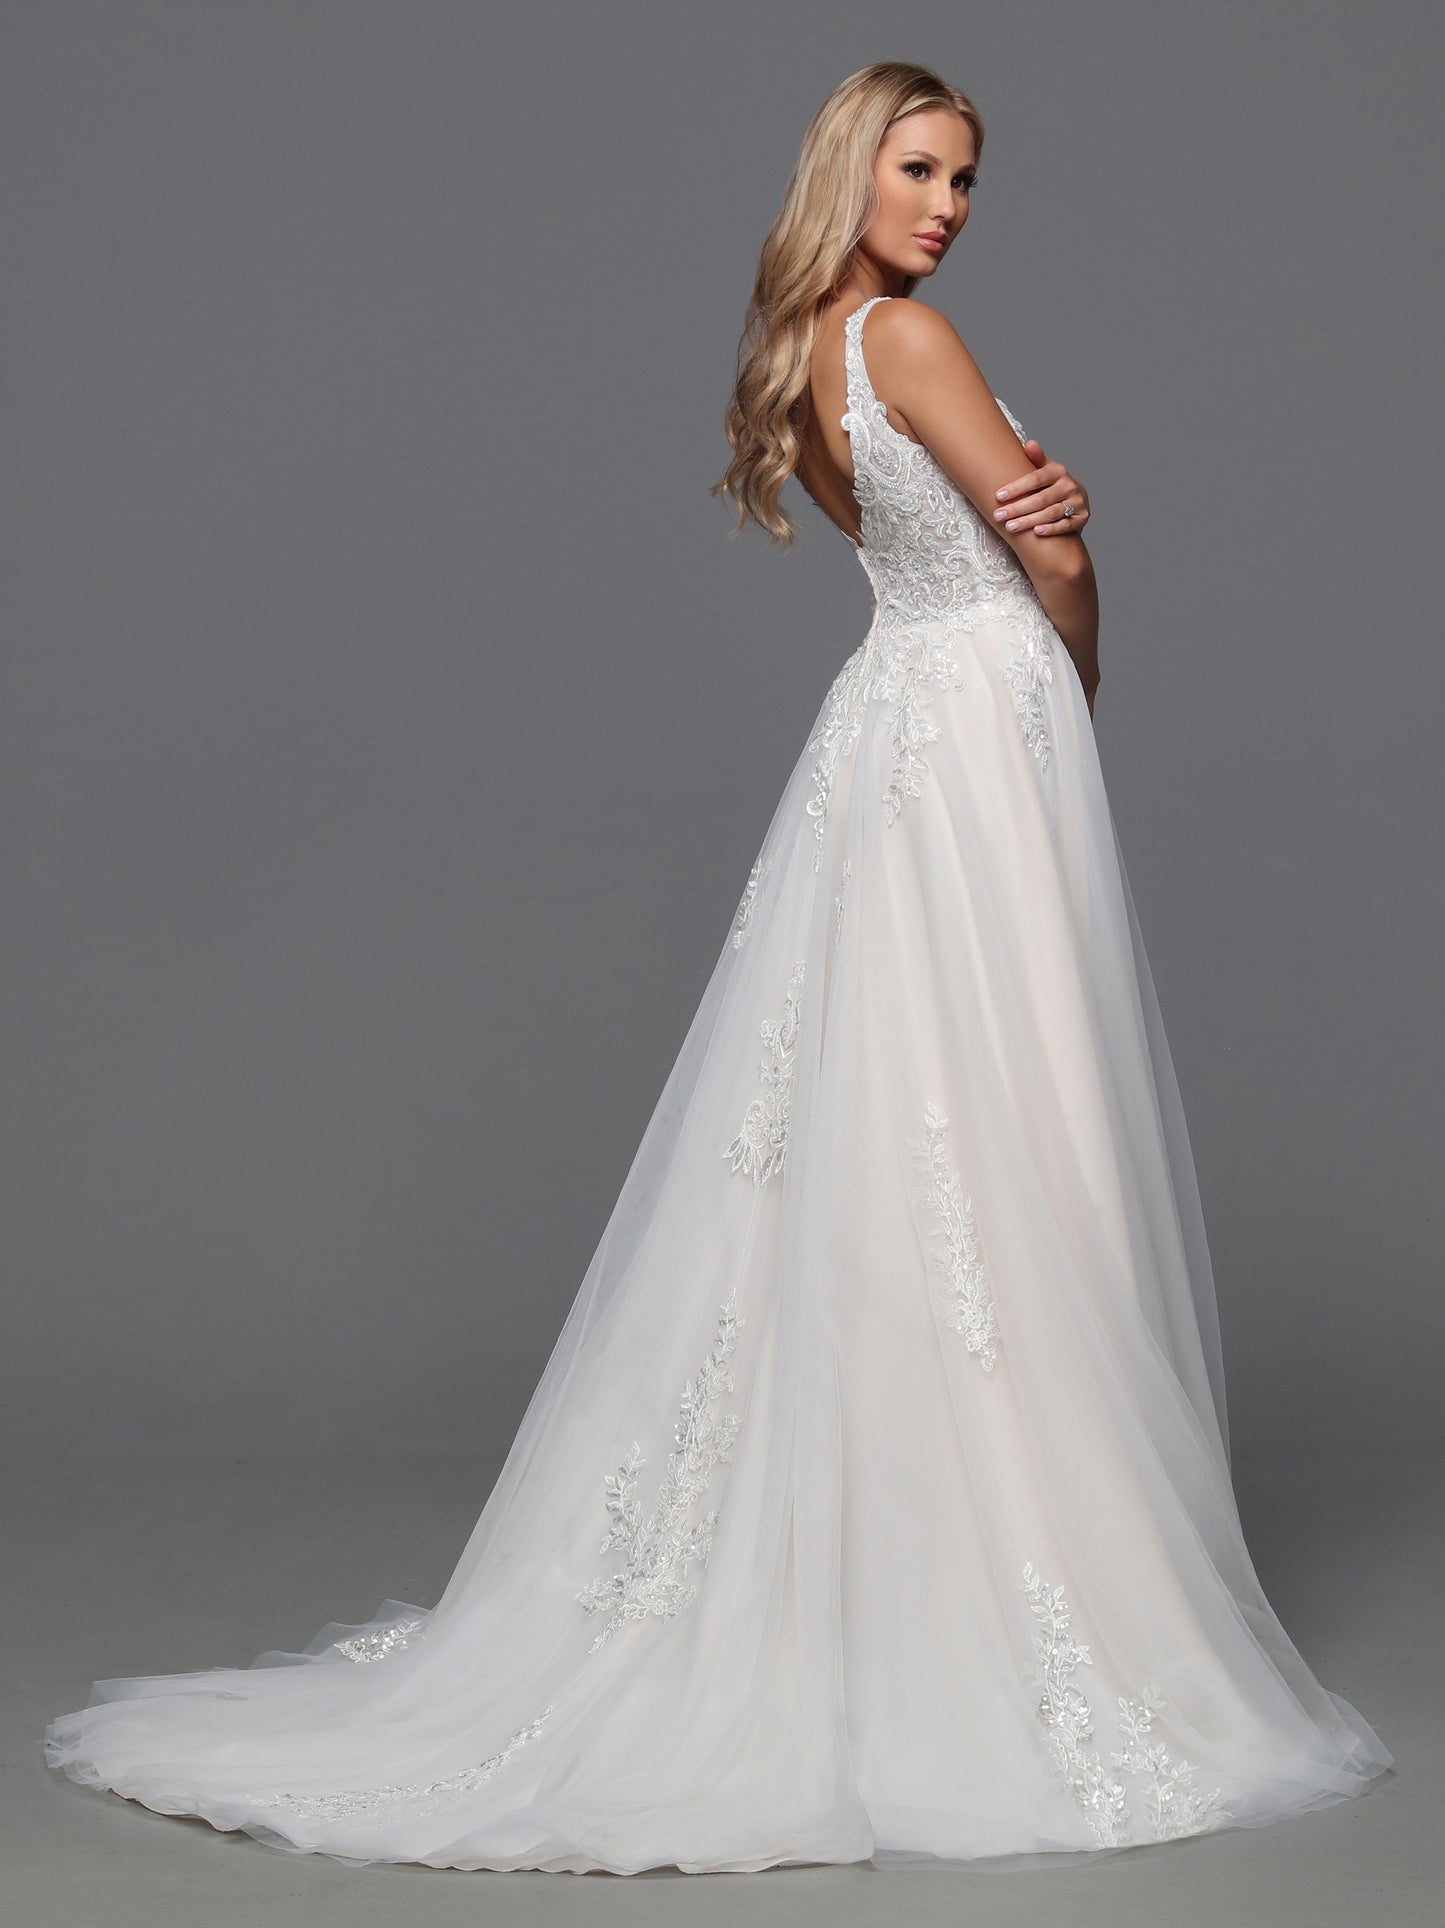 50849- Tulle/Lace/Beaded Appliquet